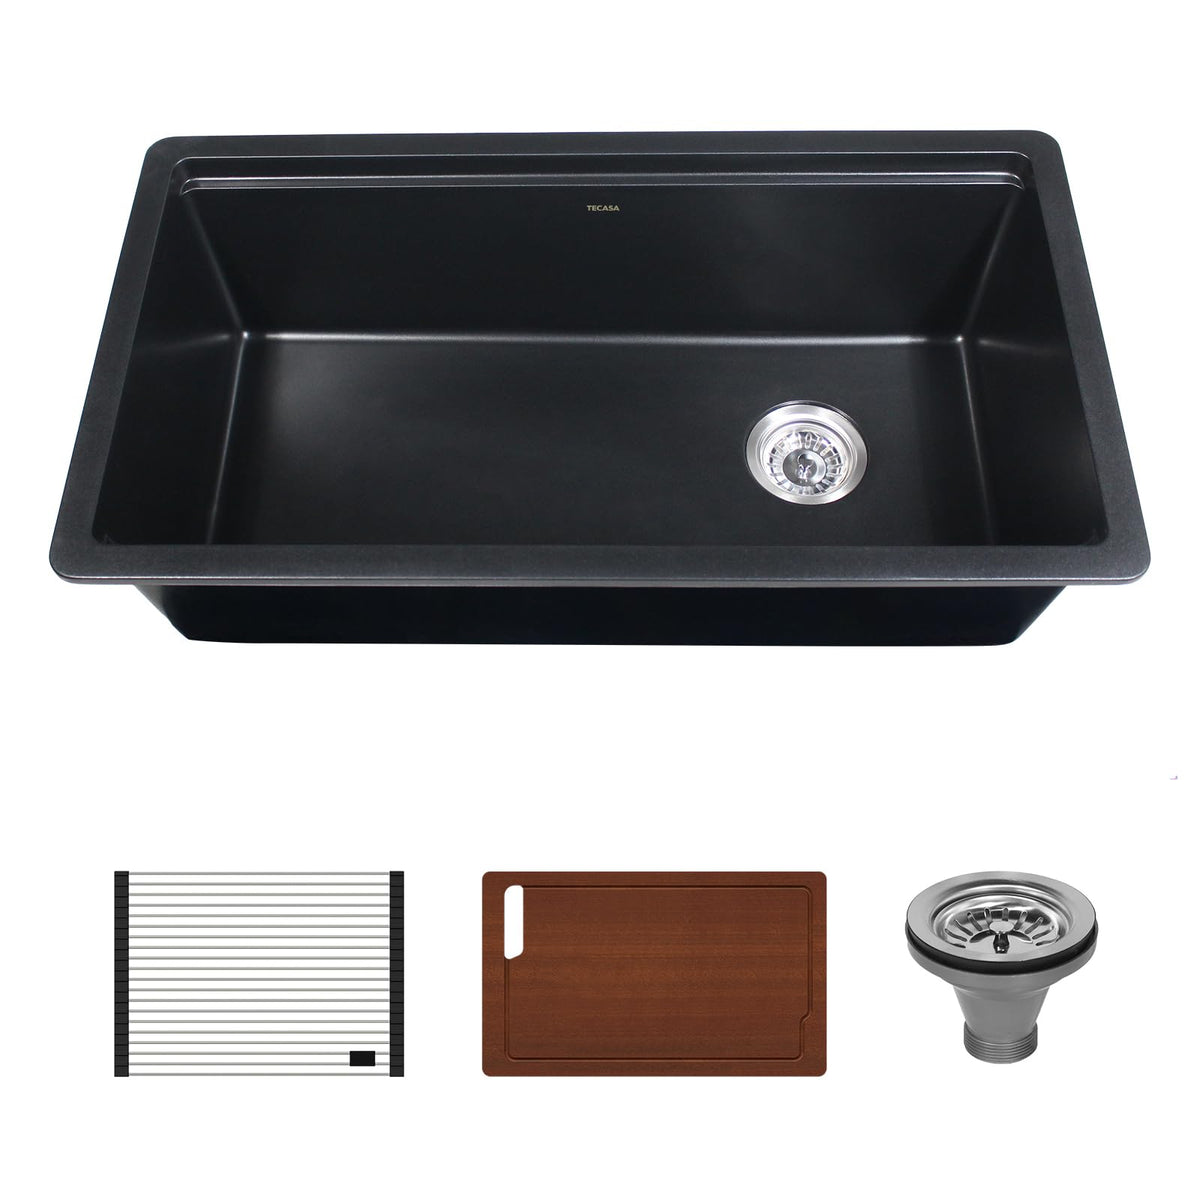 Workstation Kitchen Sink, 33 inch Granite Composite Single Bowl Undermount Sink with Accessories Drying Rack and Cutting Board, Matte Black